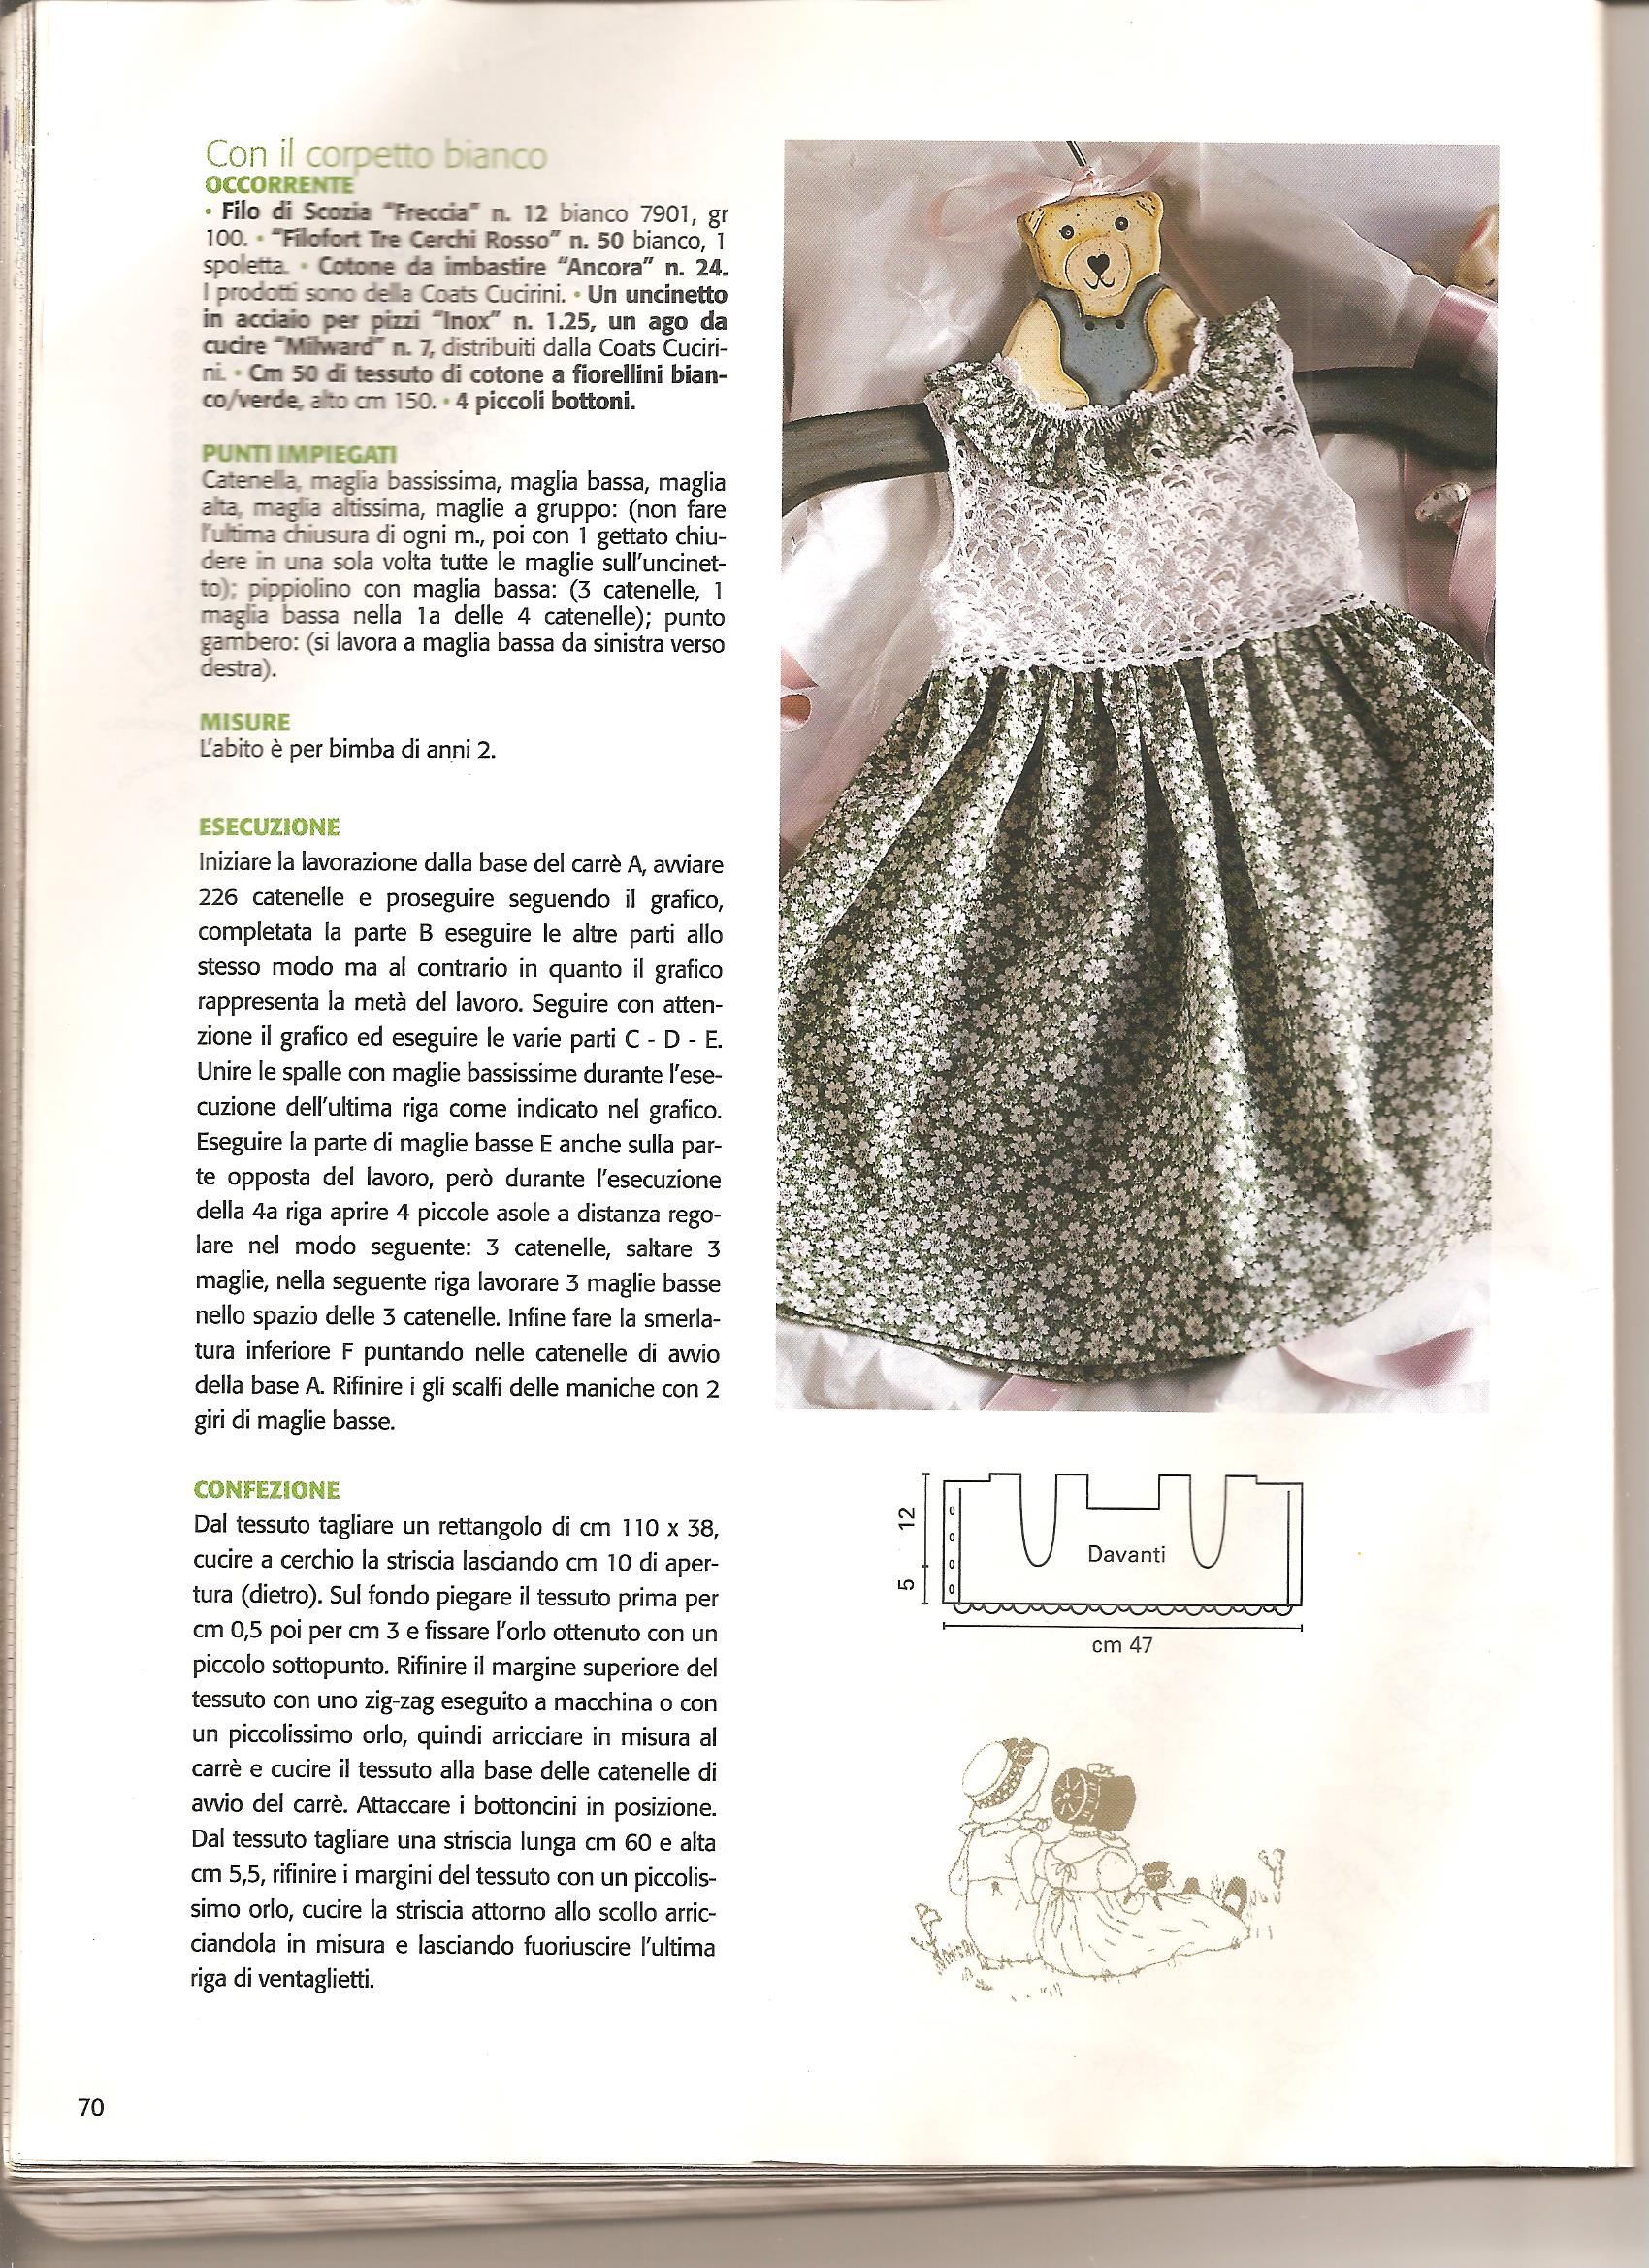 Crochet dress for 2 years old child (9)